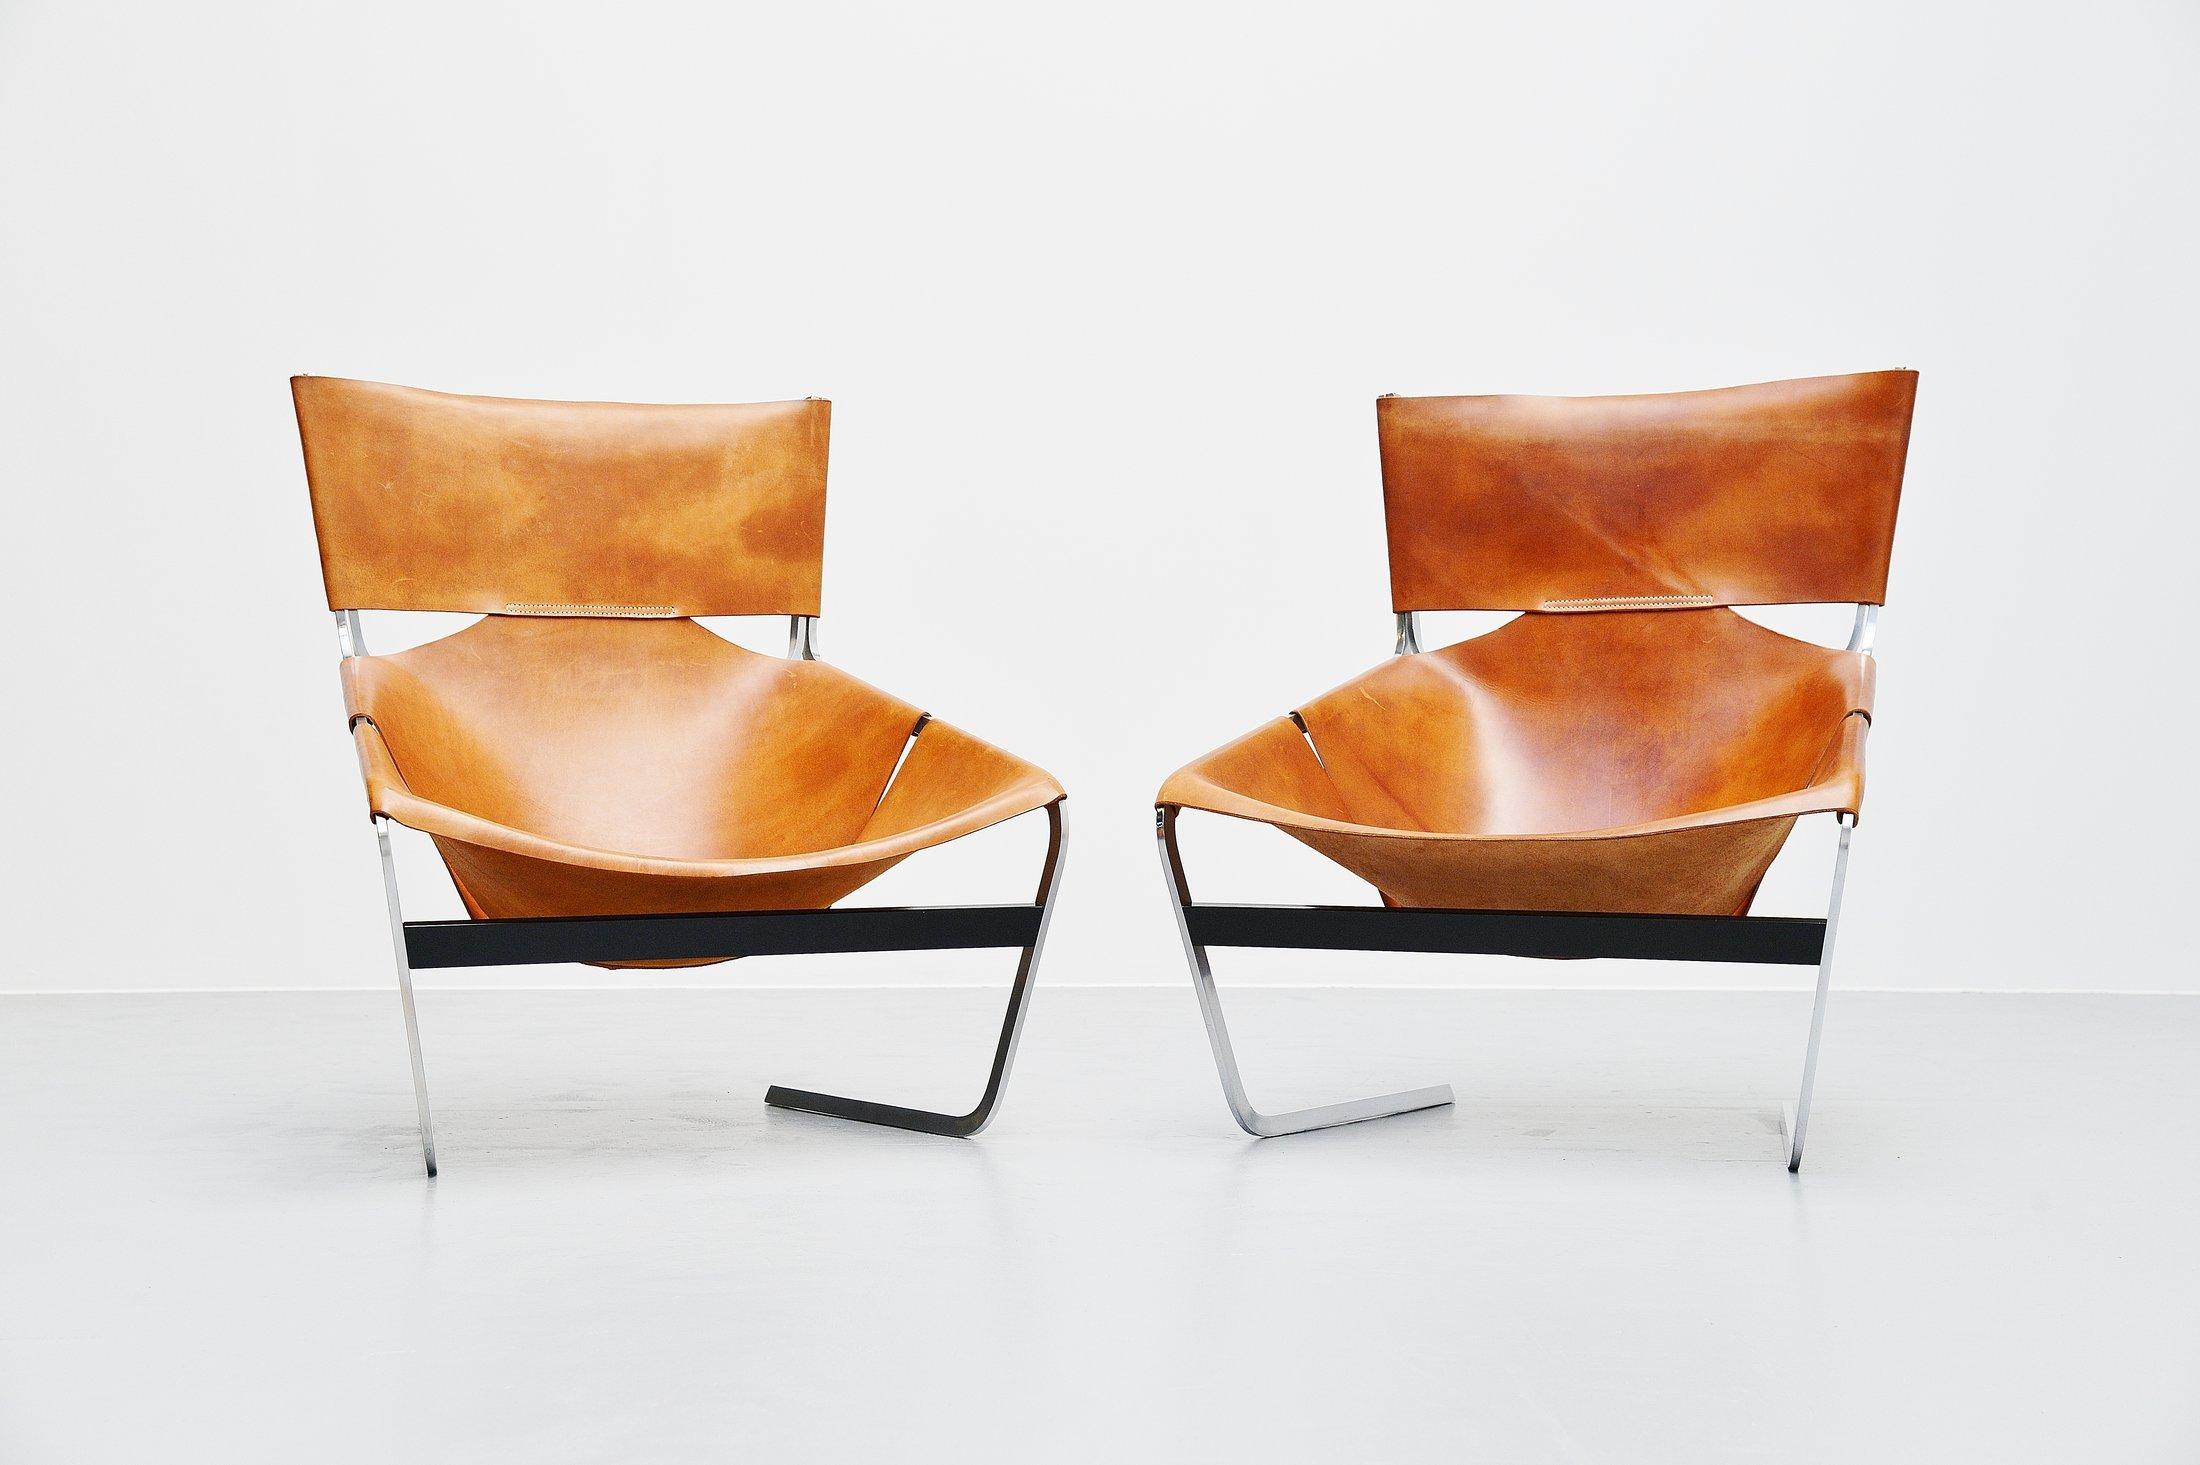 This is for a spectactular pair of F444 chairs designed by the French designer Pierre Paulin (1927-2009) and manufactured by Artifort, Holland 1963. These chairs are hard to find in general but its the first time in years I came across a pair of